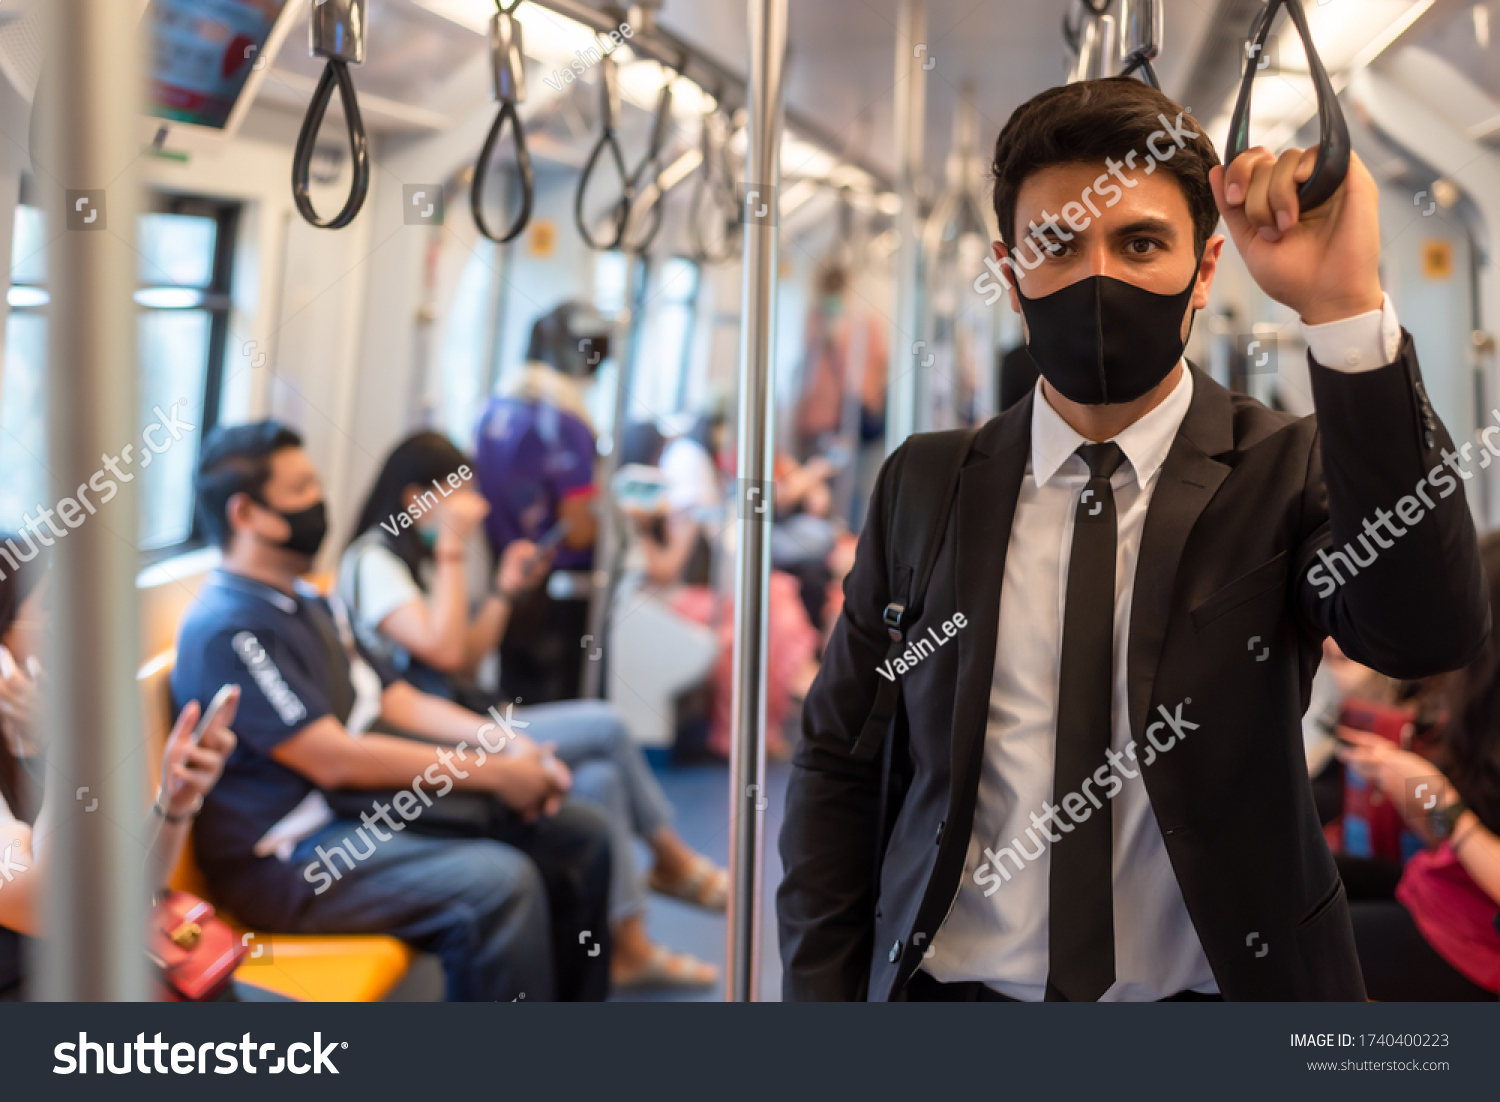 Portrait of confident businessman in black suit wear mask in city finding job during corona crisis using smartphone travelling on empty train #1740400223